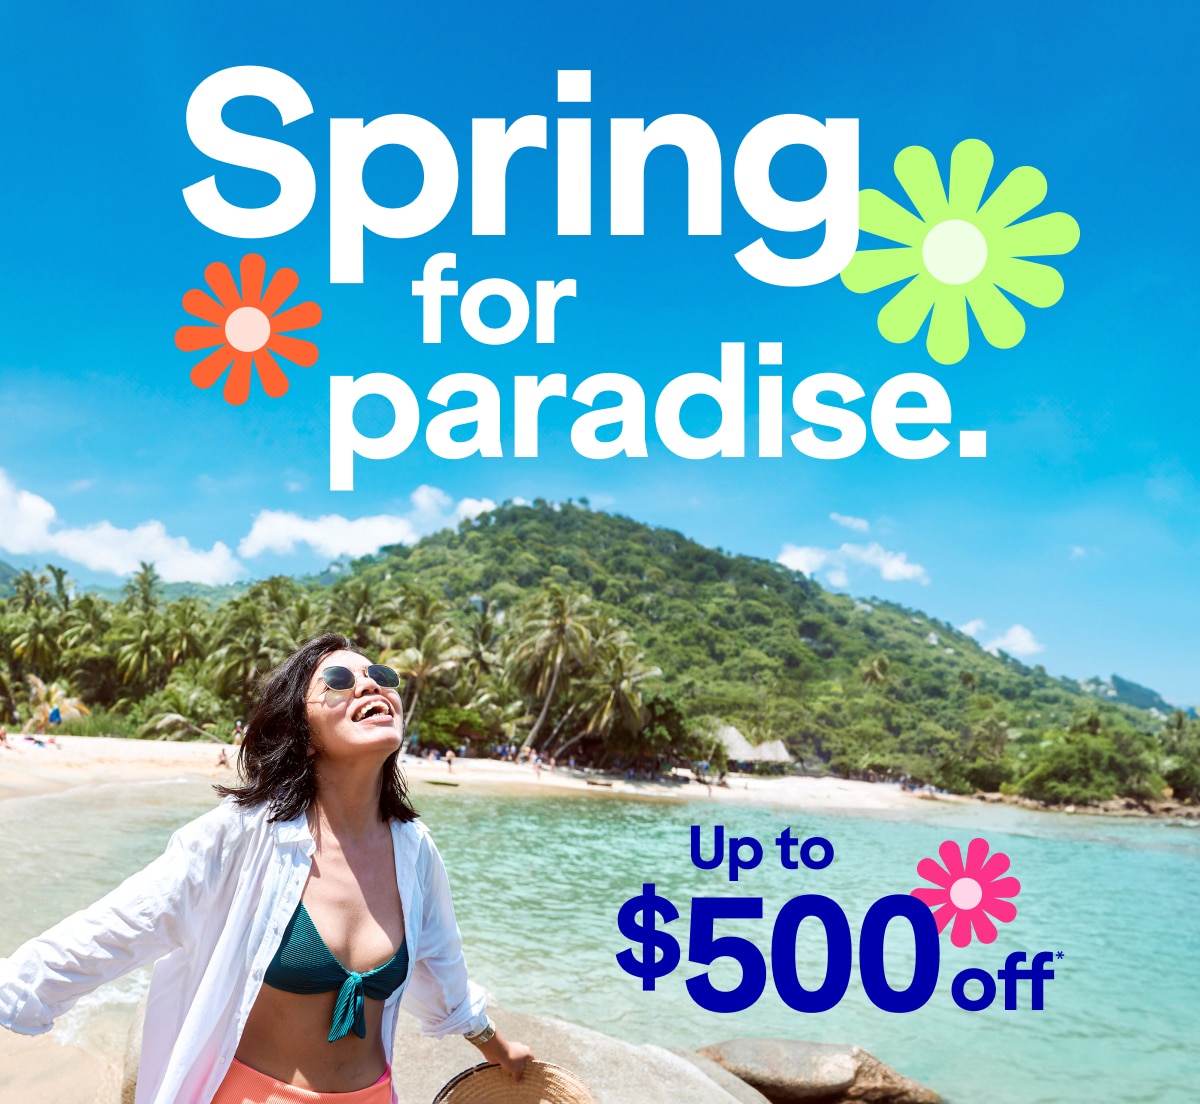 Spring for paradise. Up to $500 off.*